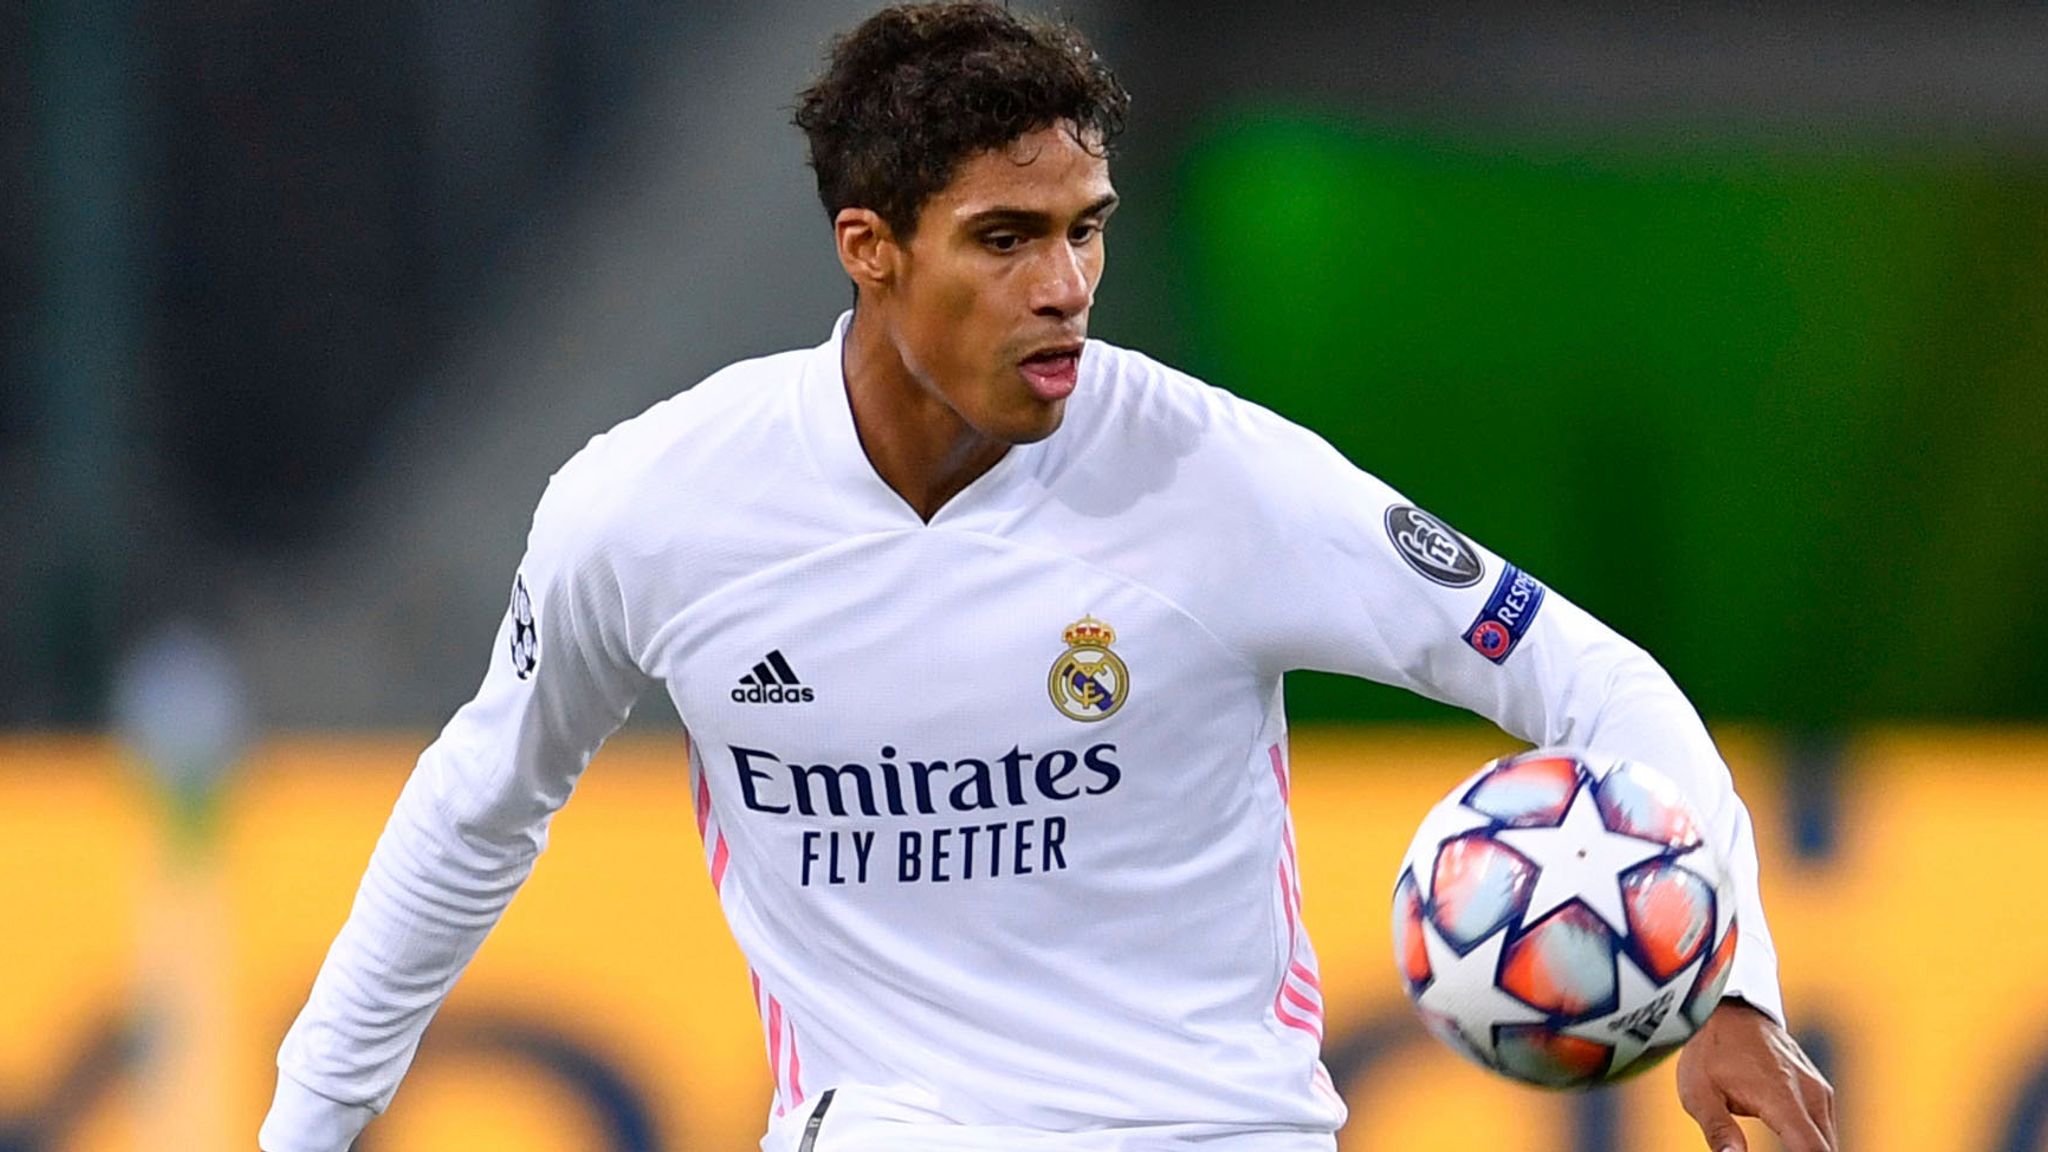 Manchester United are set to make an offer for Real Madrid centre back Raphael Varane THIS WEEK